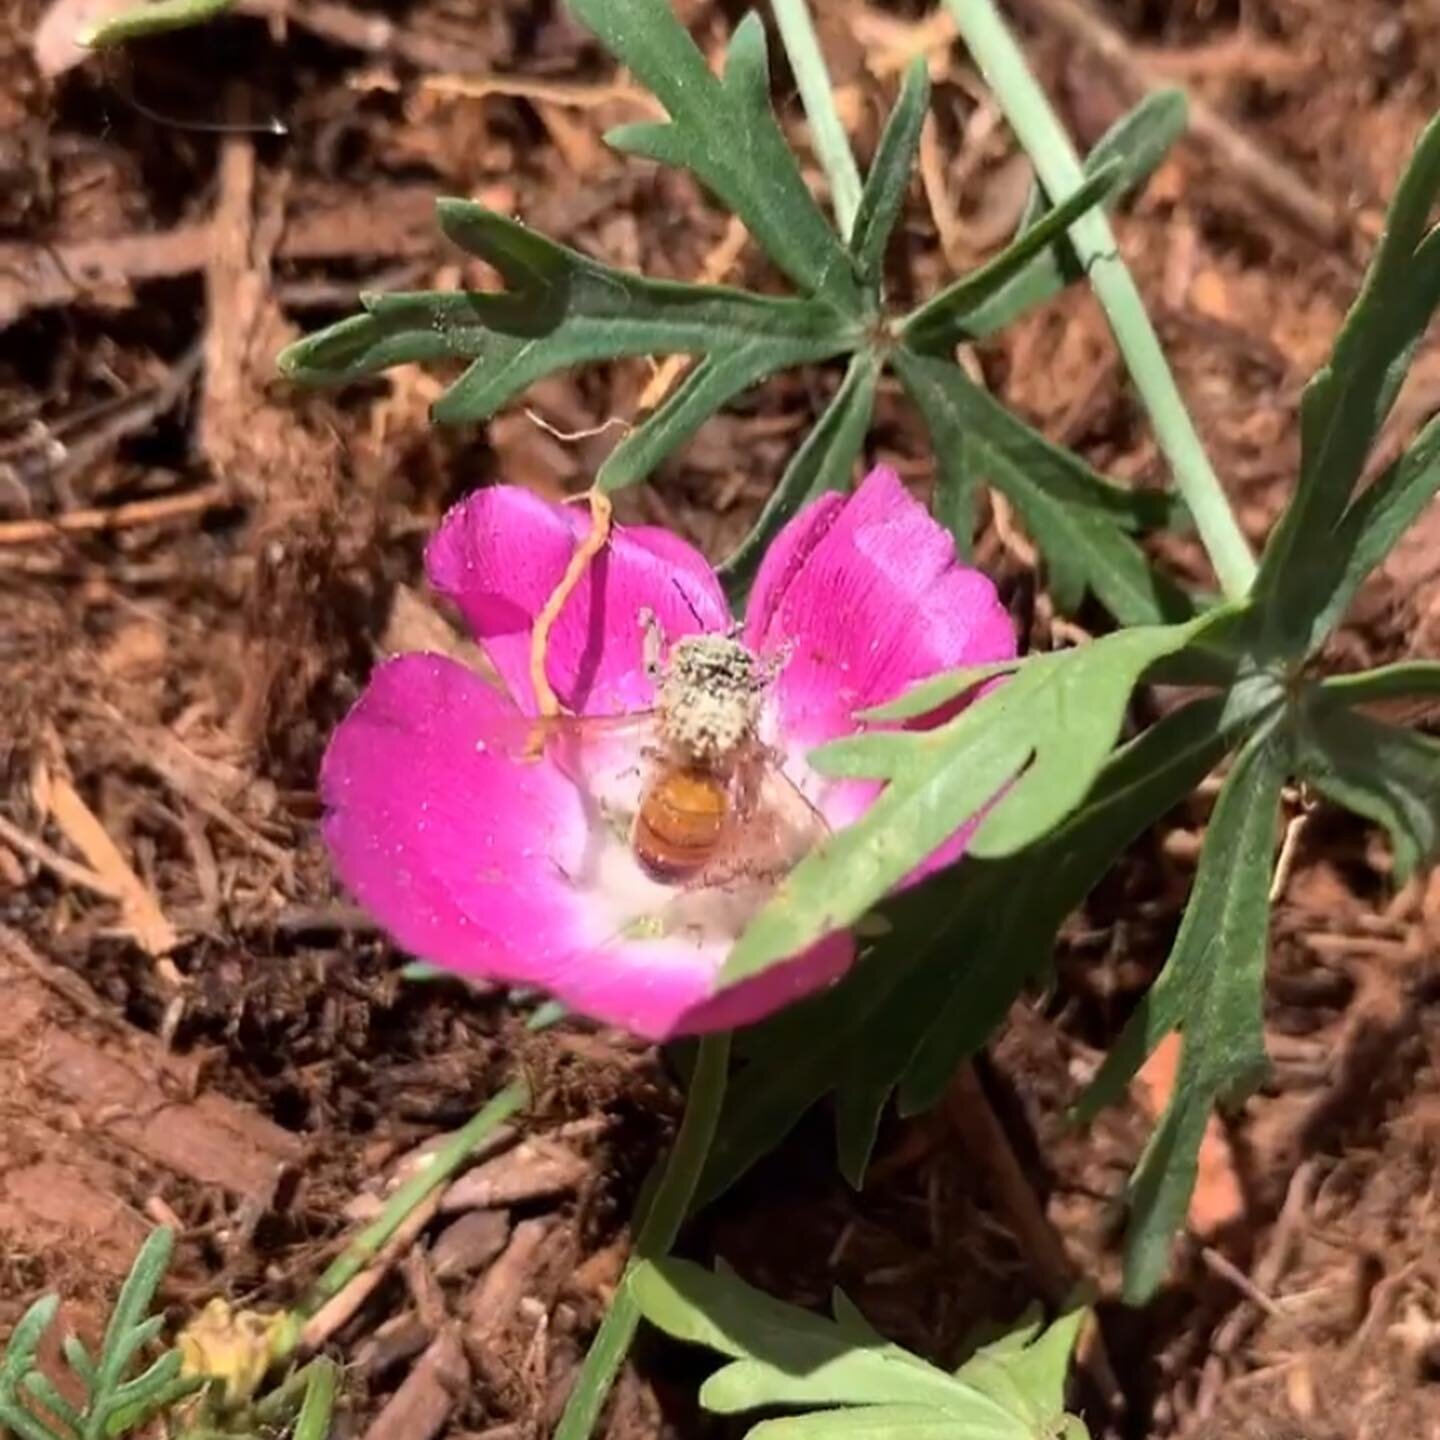 Bees, both wild and honeybees, pollinate 90% of our food worldwide. This weekend we planted a season-long buffet of nectar and pollen. 😍 
Very cool experience being buzzed (literally) by bees snacking on the new garden in town. 🐝🌸
.
.
.
.
#pollina